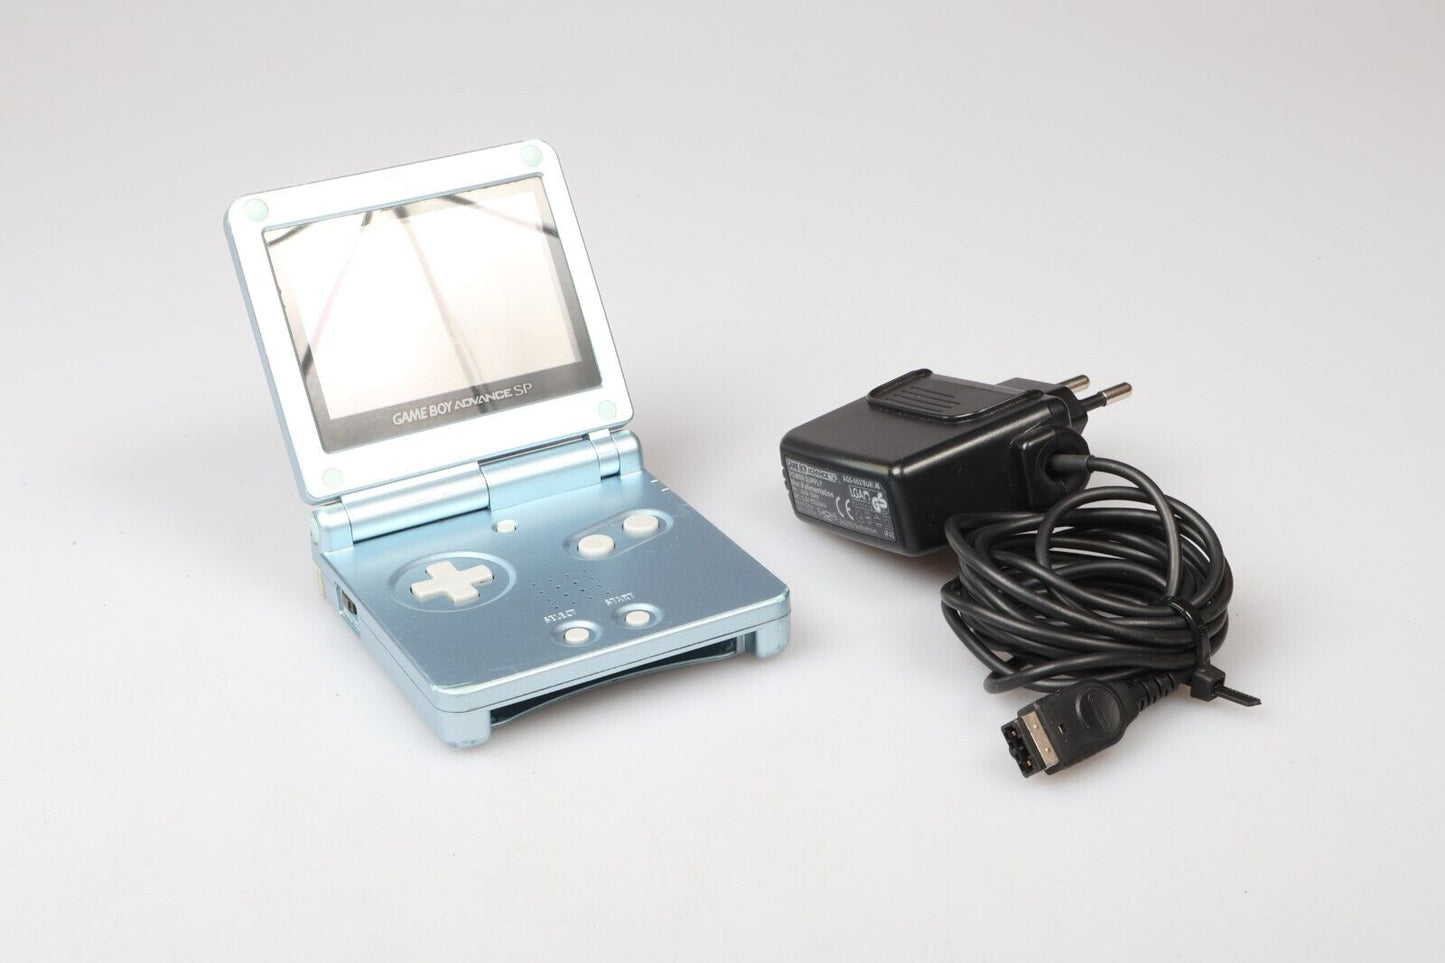 Gameboy Advance SP | ASG-001 Handheld Pearl Blue